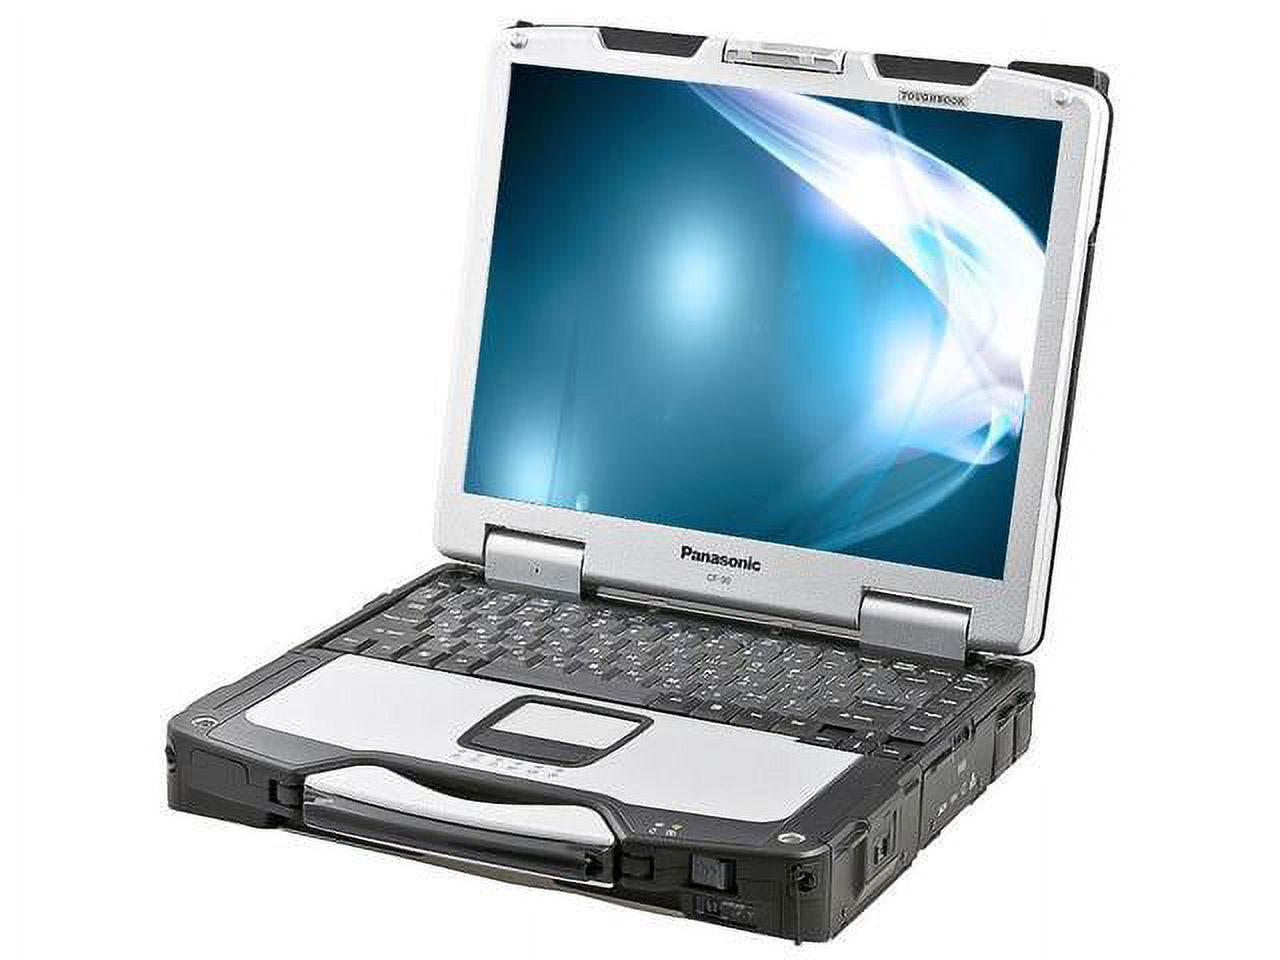 Panasonic ToughBook CF-30 Intel Core Duo 1600 MHz 80GB HDD 3072mb 13.0” WideScreen LCD Windows 7 Pro 32 Bit USED - image 1 of 4